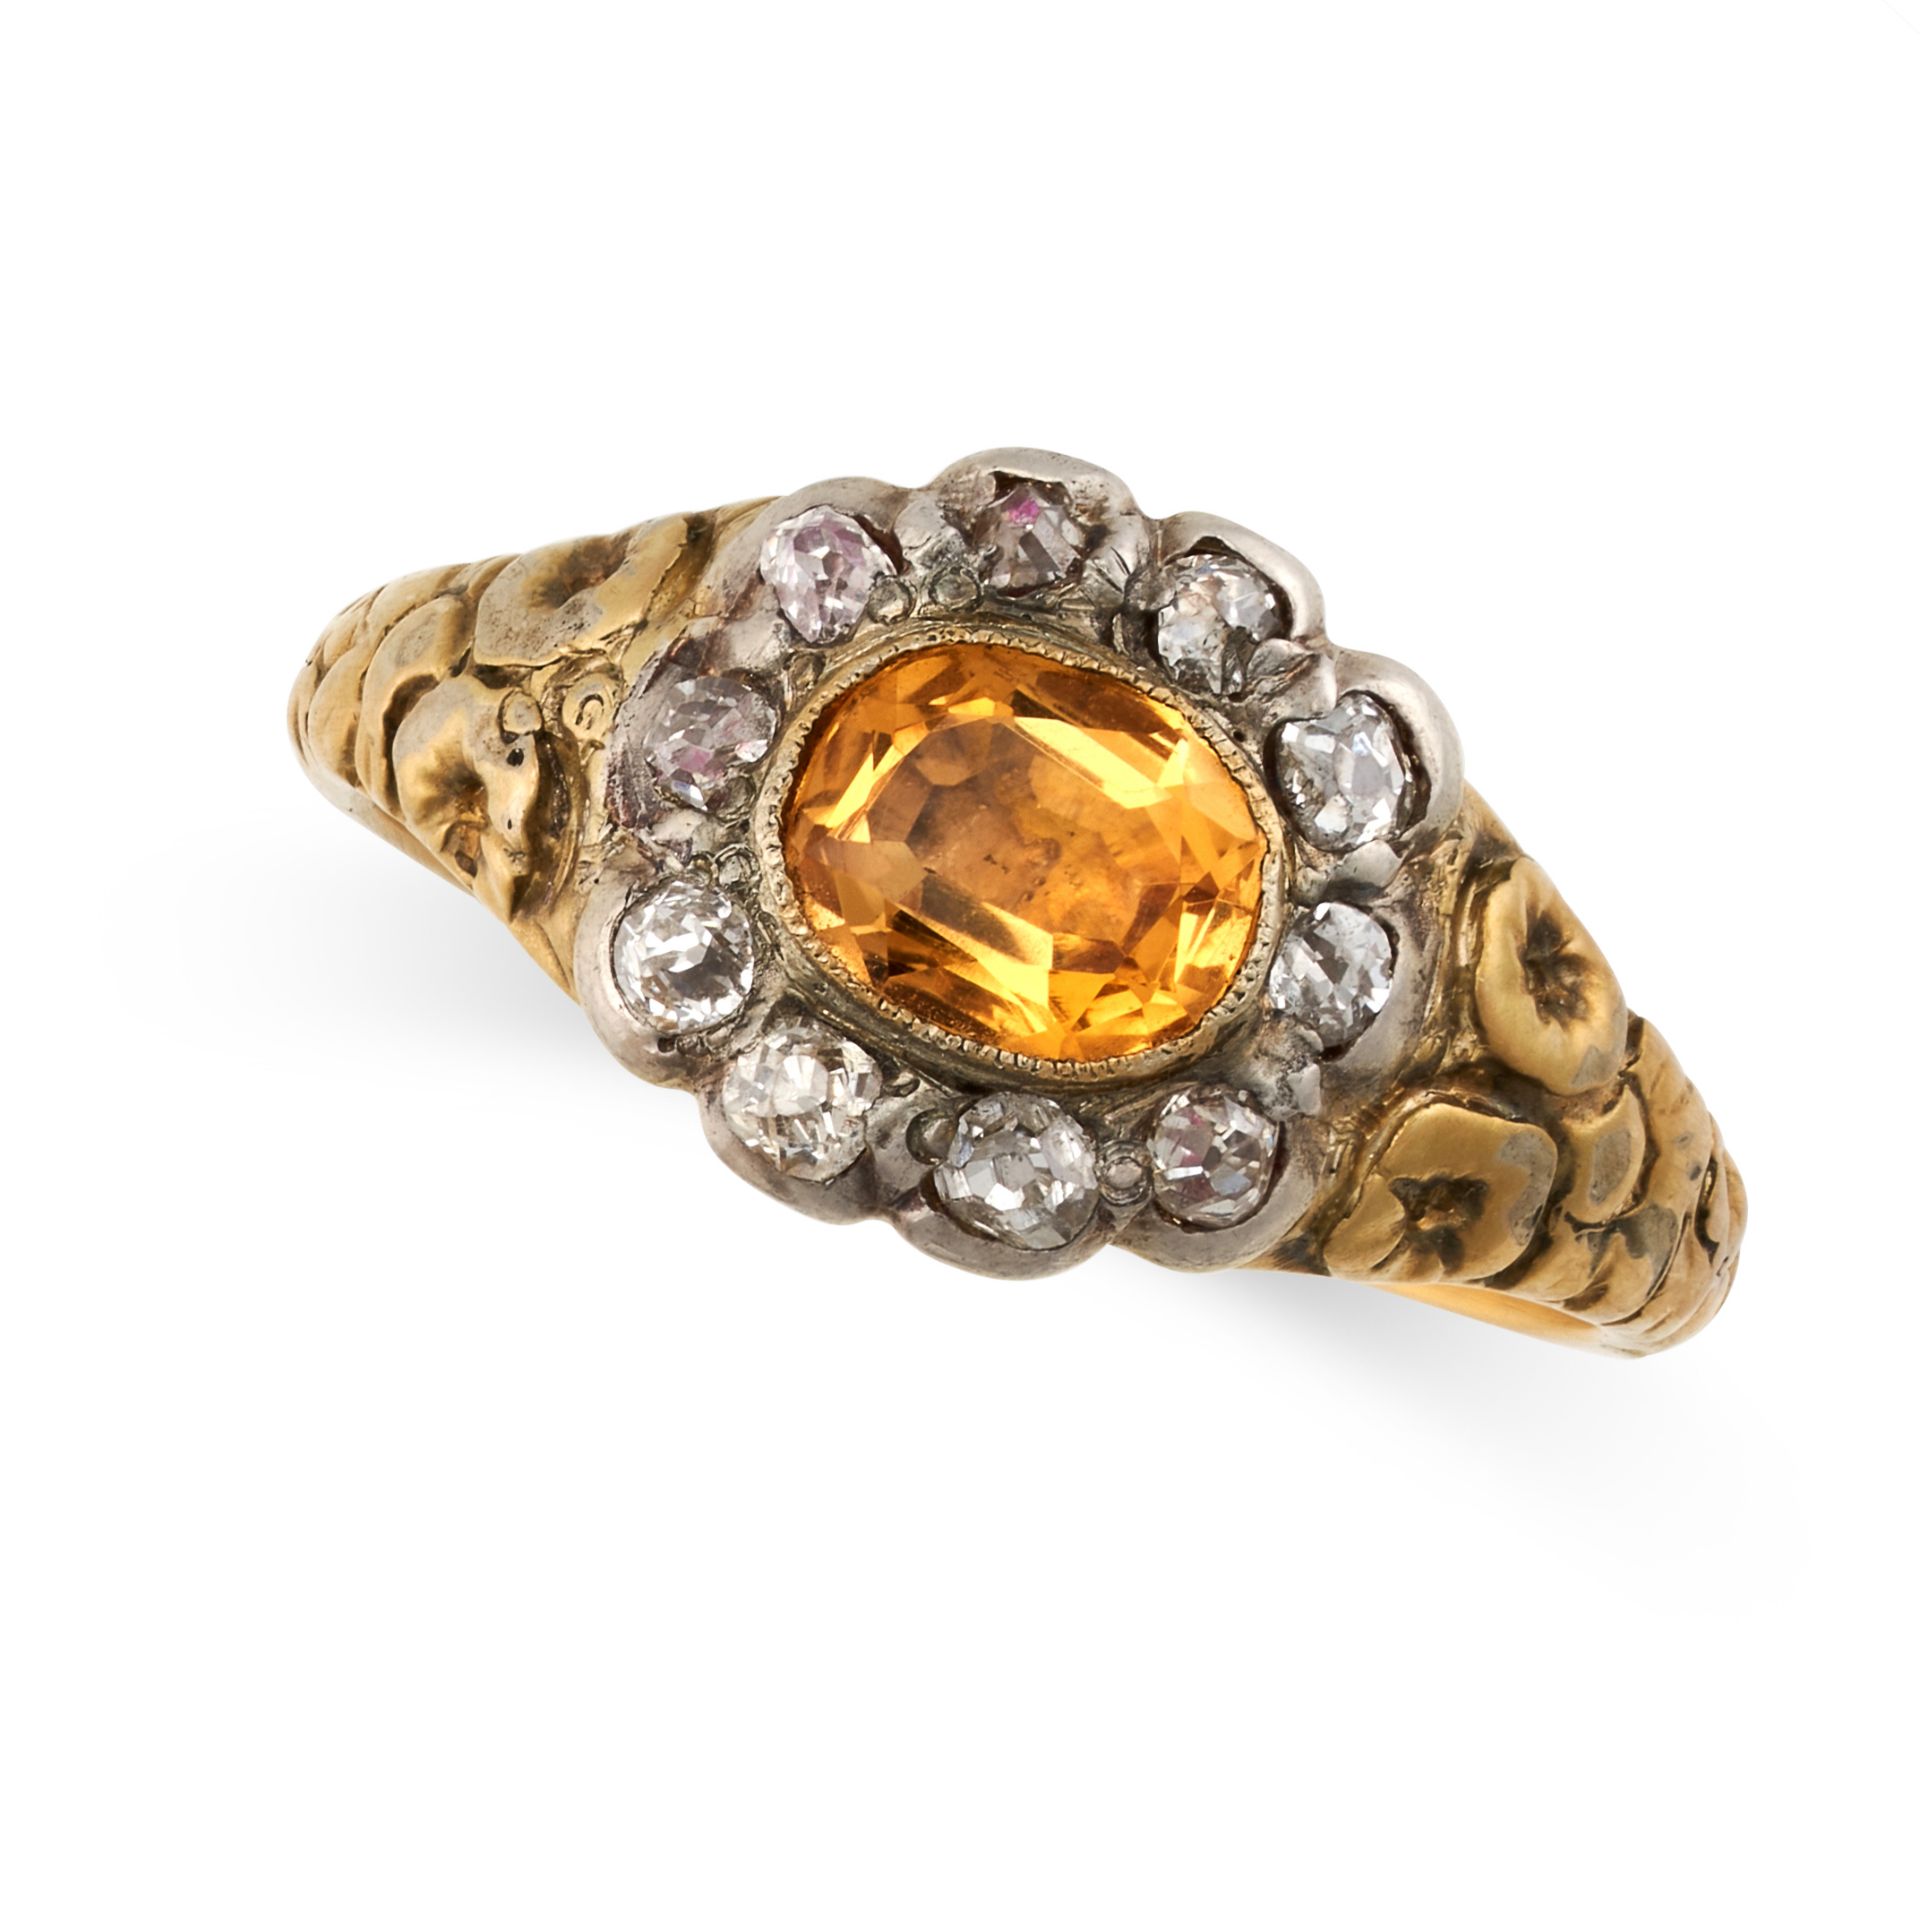 AN ANTIQUE IMPERIAL TOPAZ AND DIAMOND RING in yellow gold and silver, set with an oval cut